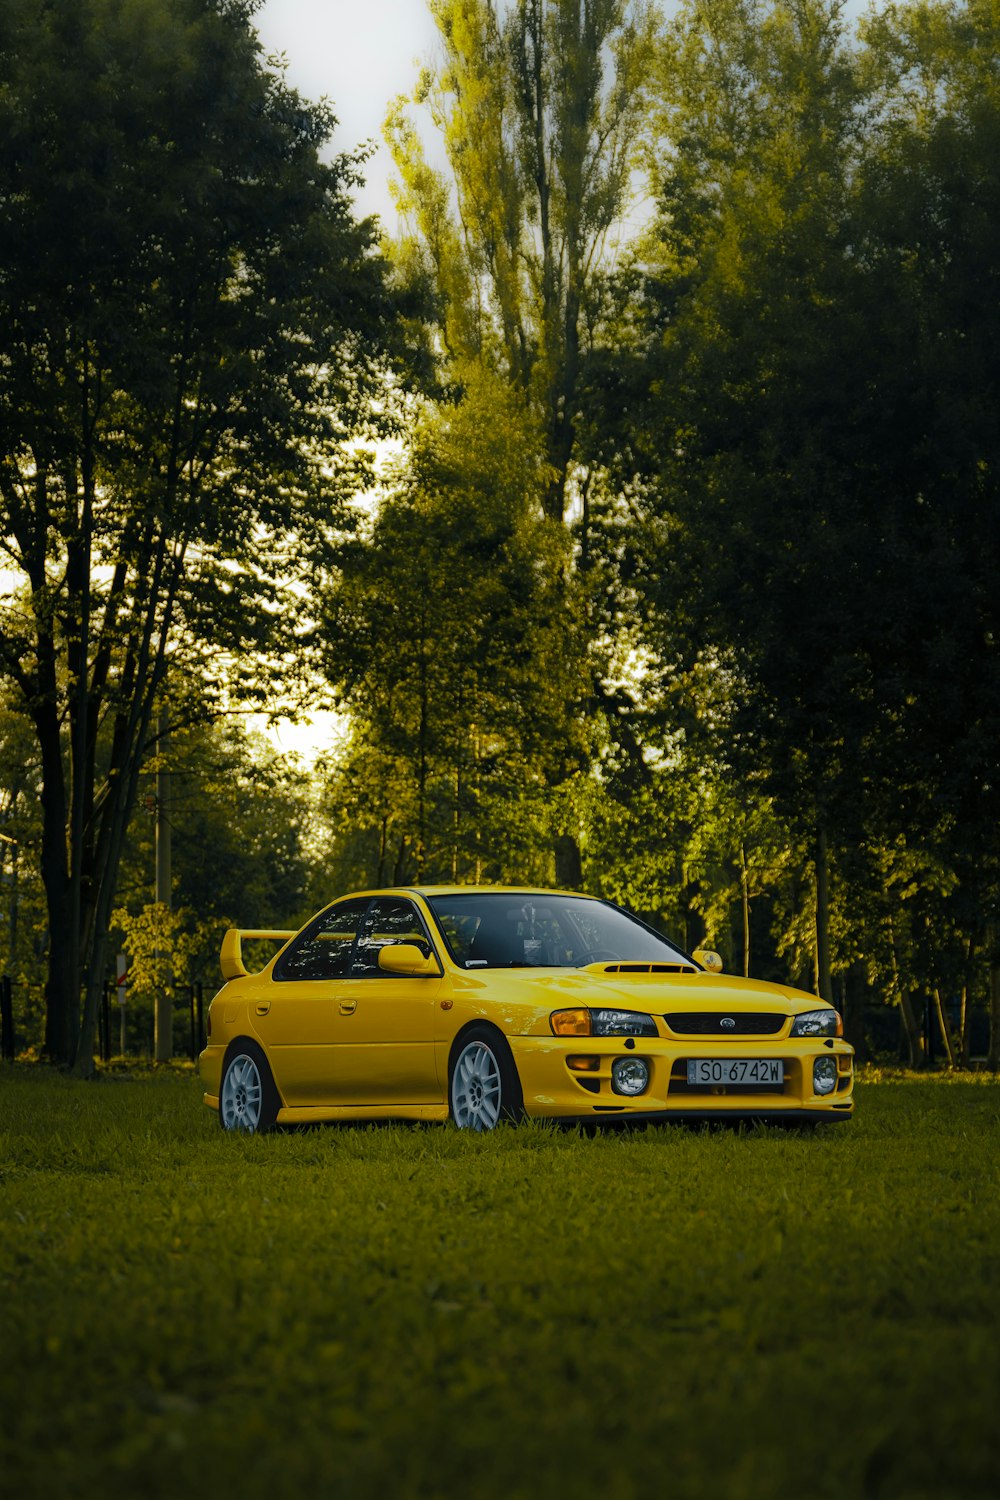 a yellow car parked in a grassy field